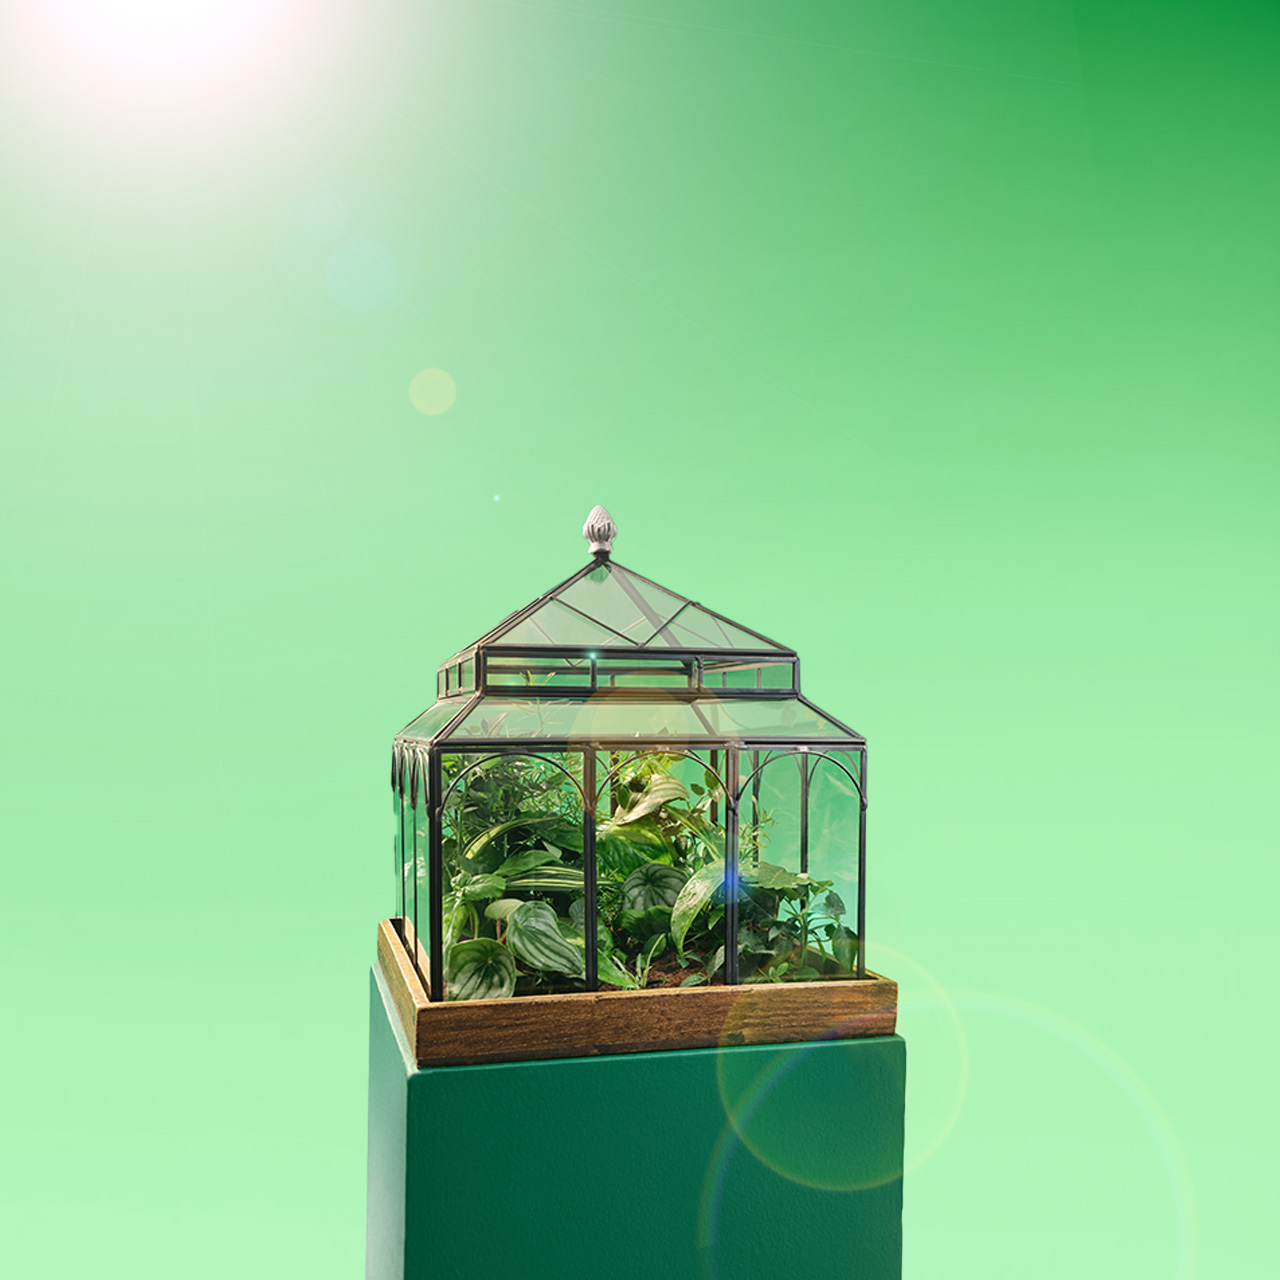 Image of a greenhouse against green gradient background